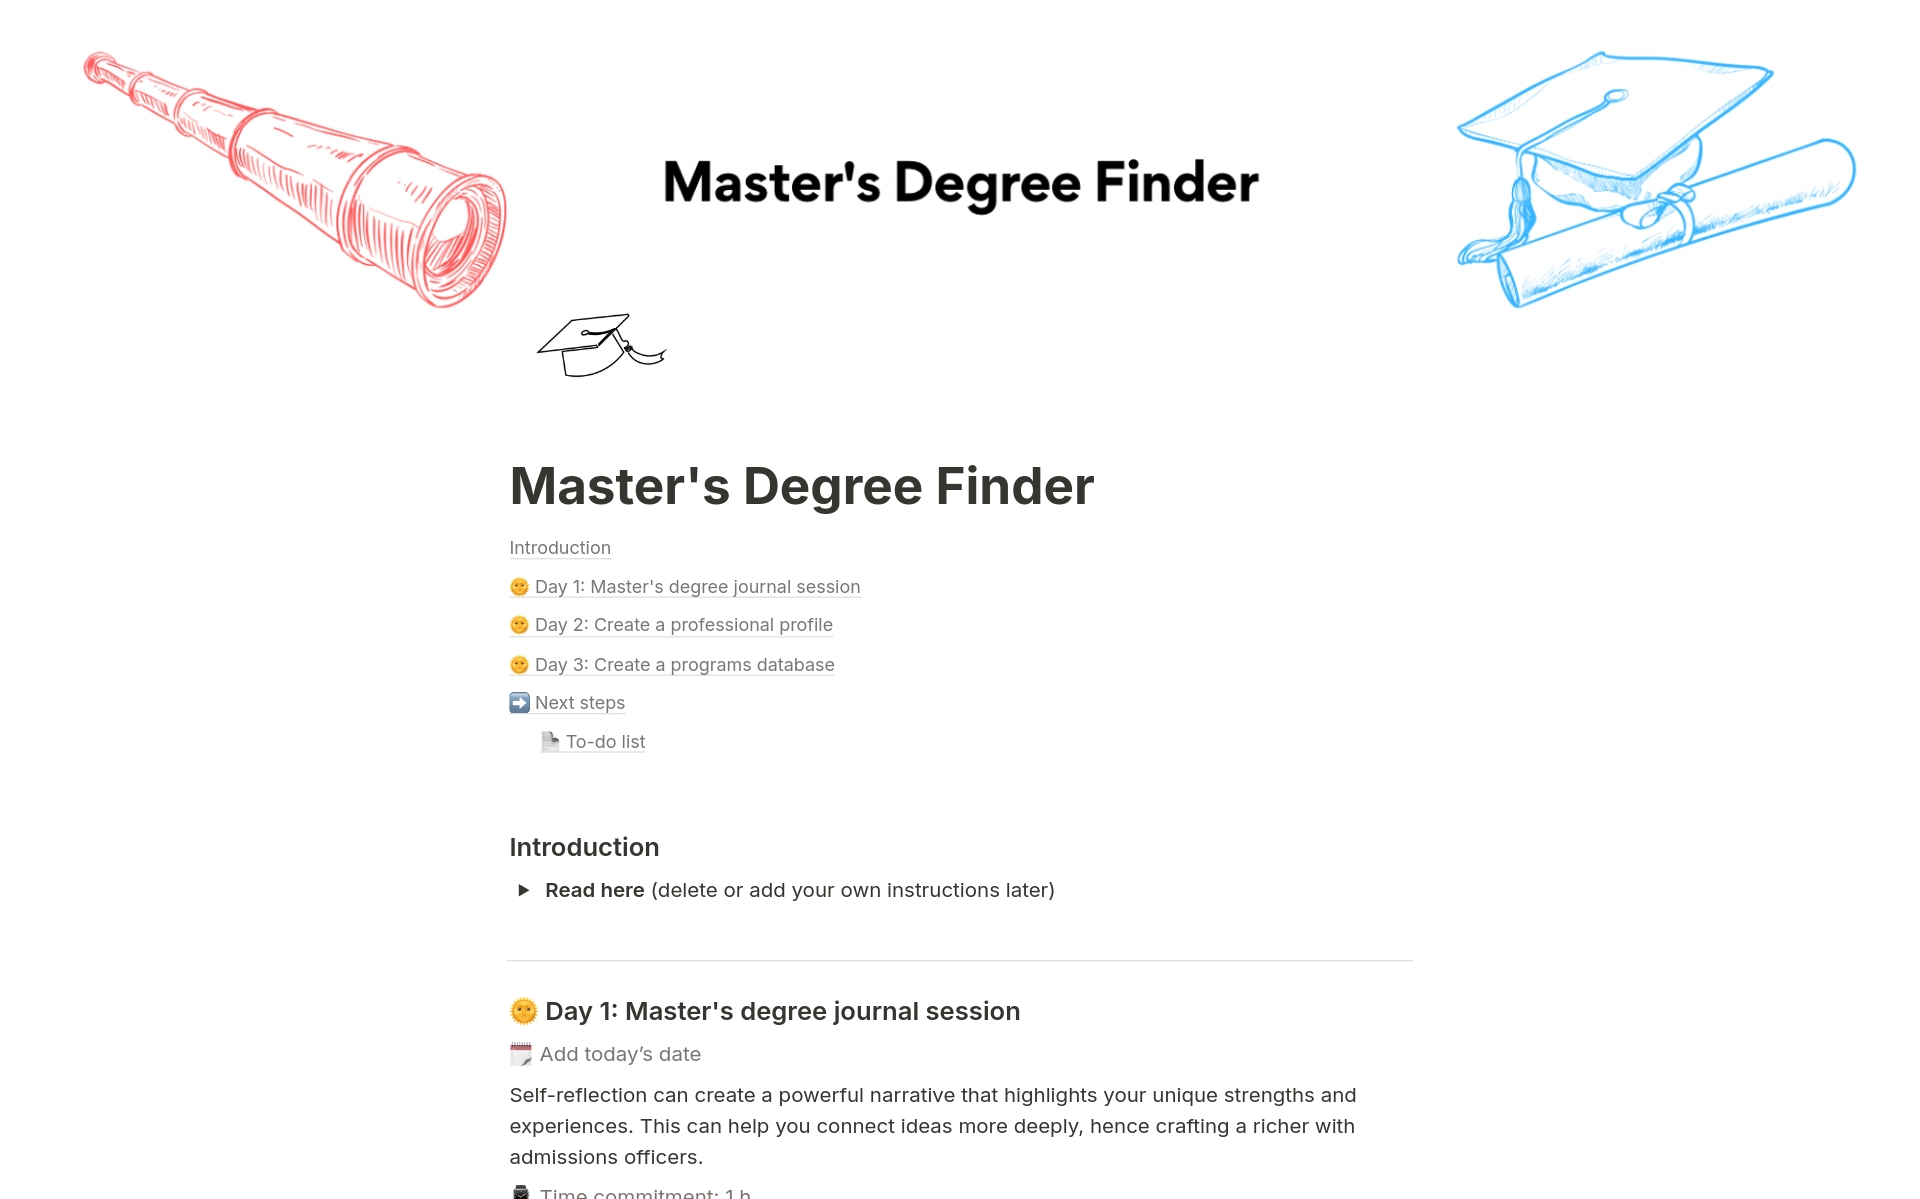 The purpose of this template is to provide you with a pathway to selecting a Master's Degree program that aligns with your calling and needs. 